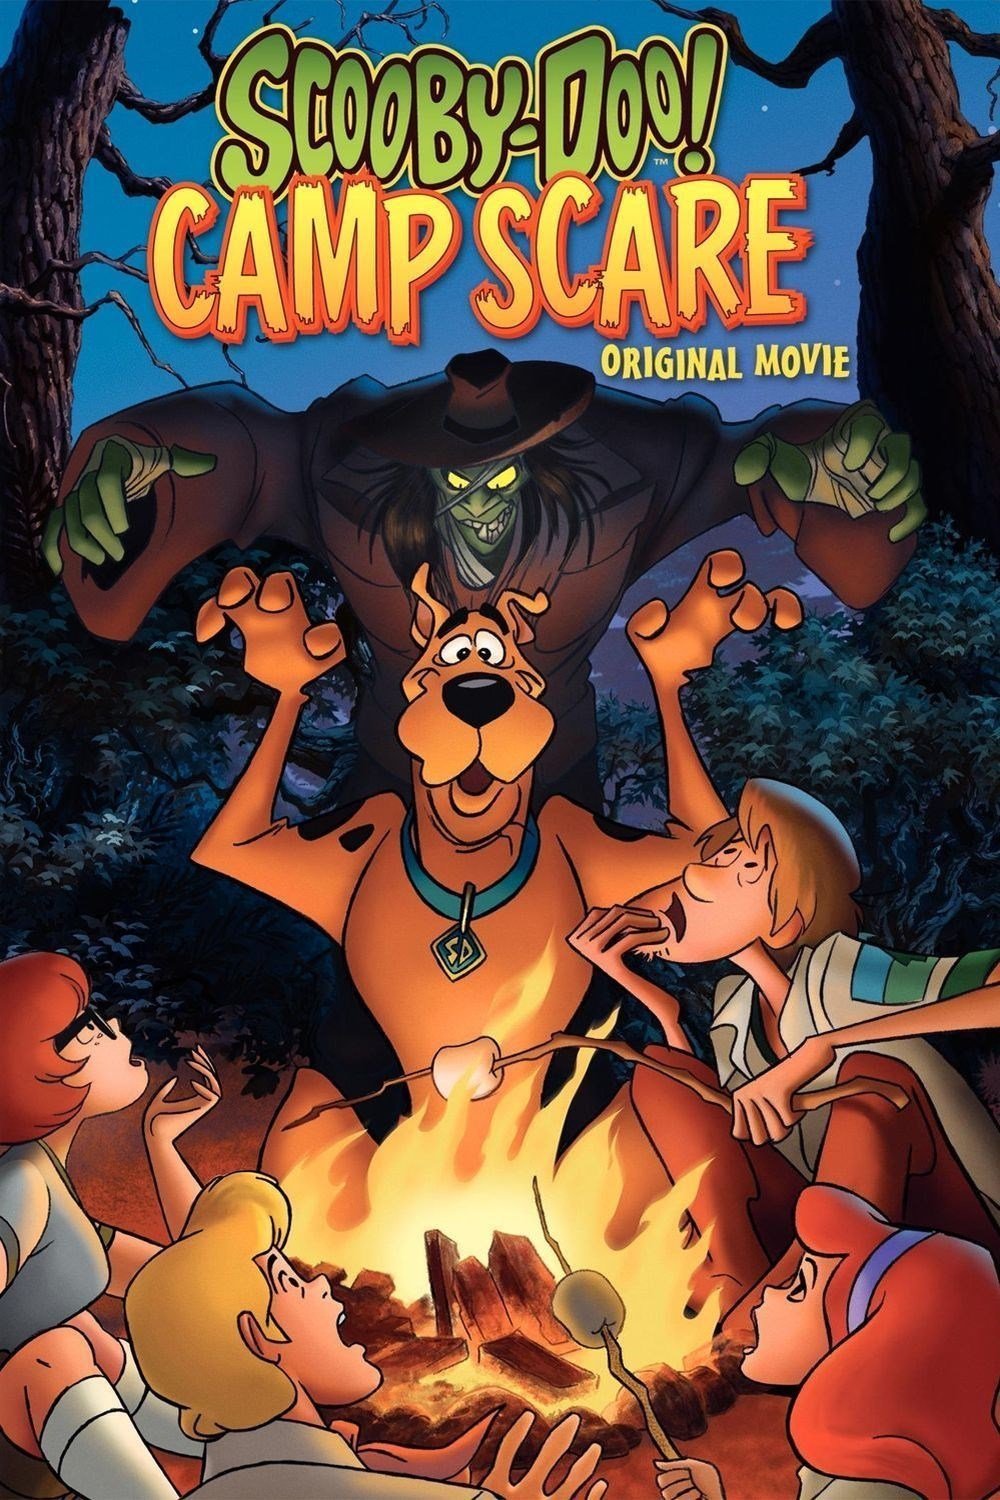 Poster of the movie Scooby-Doo! Camp Scare